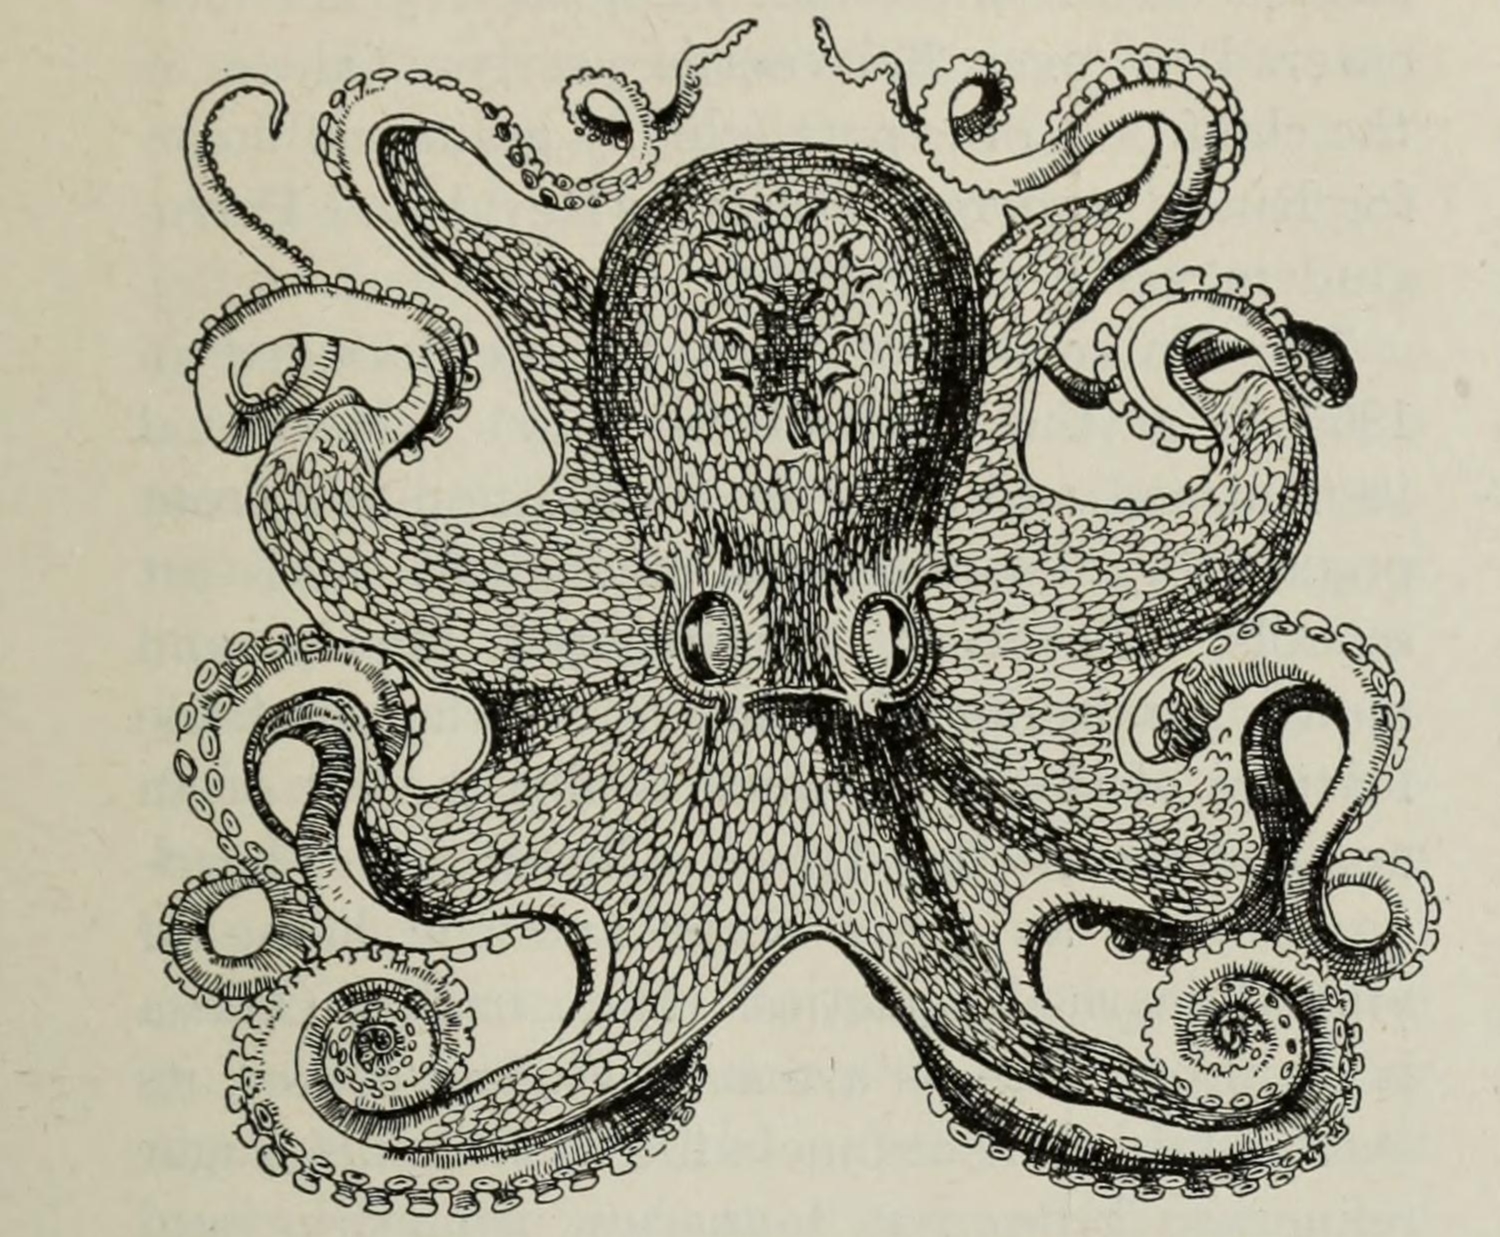 Data Deluge: Other Minds: The Octopus and the Evolution of Intelligent ...